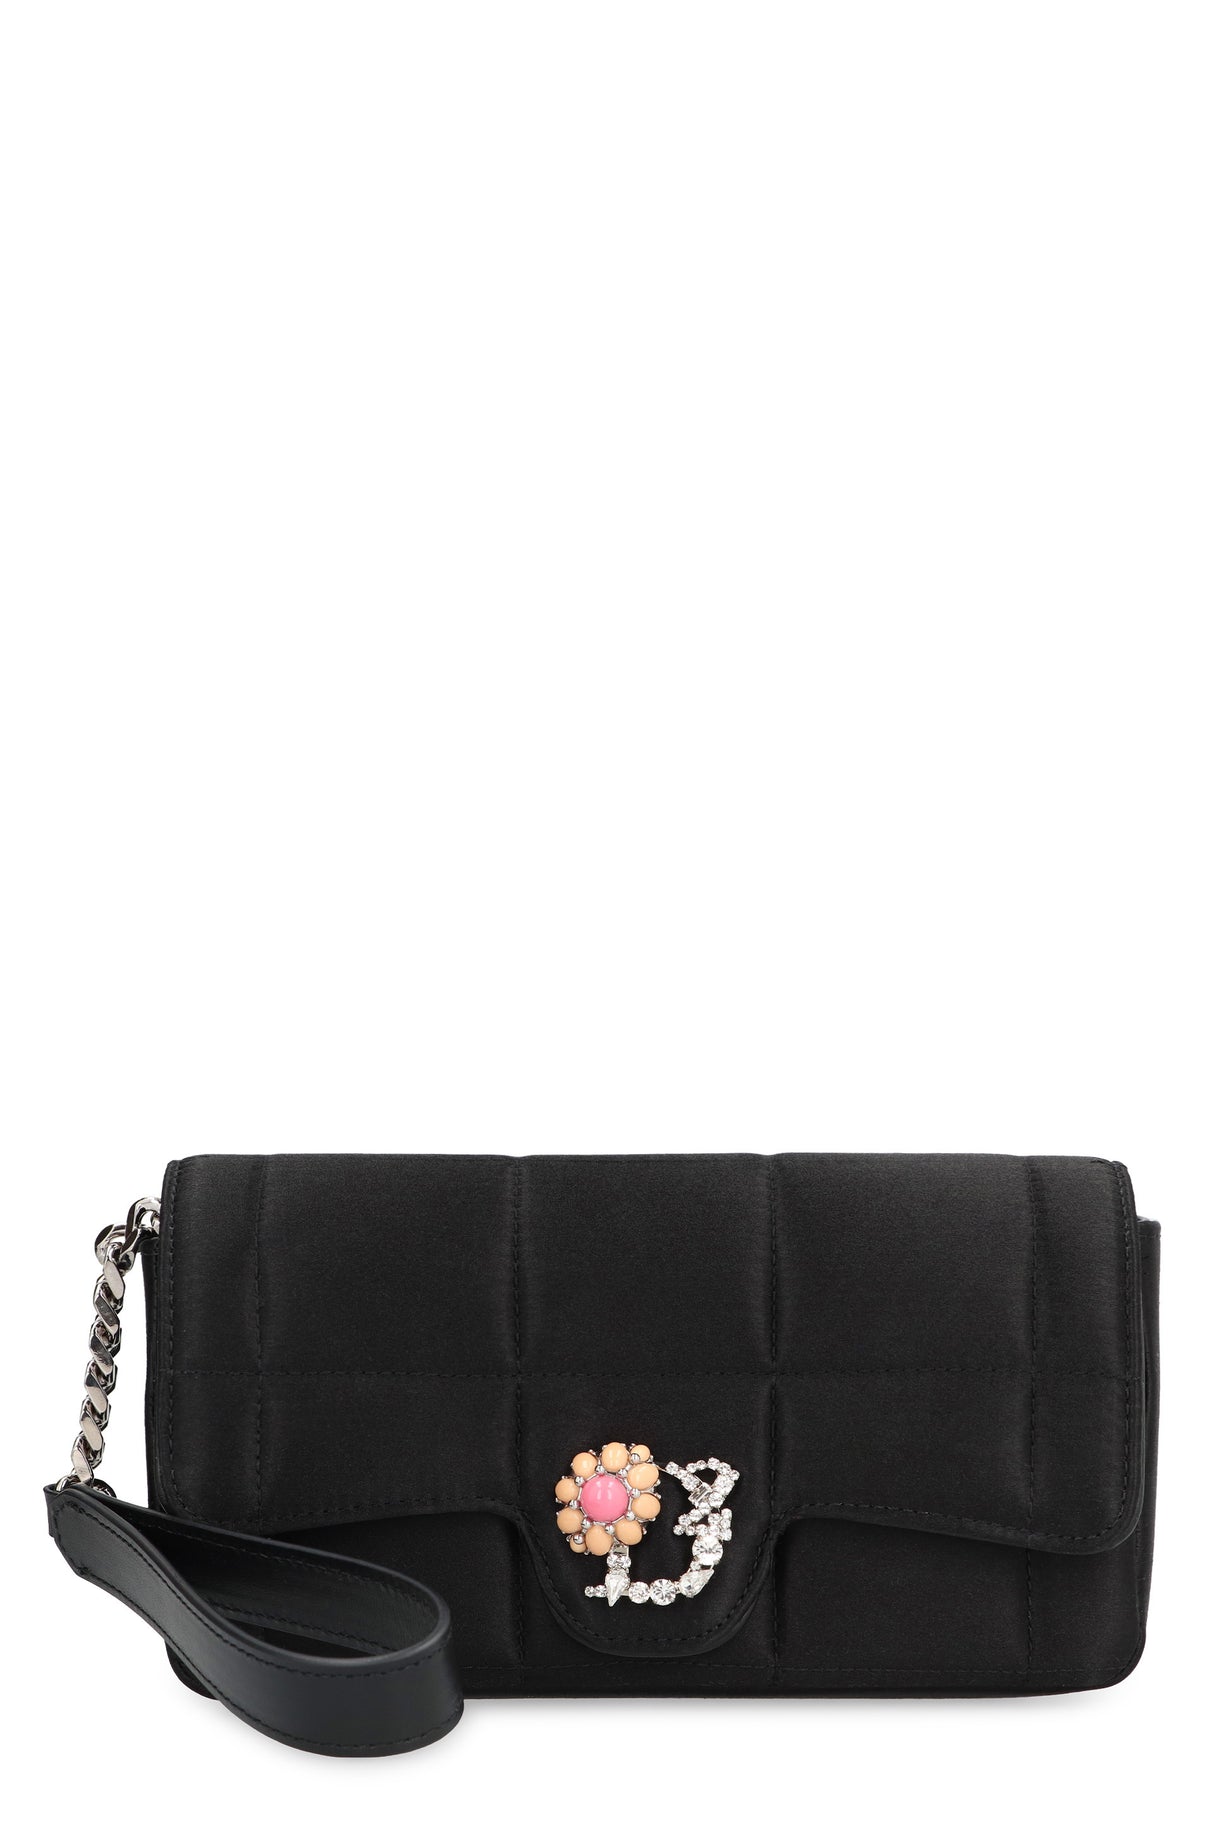 DSQUARED2 Quilted Satin Clutch with Embellished Details for Women